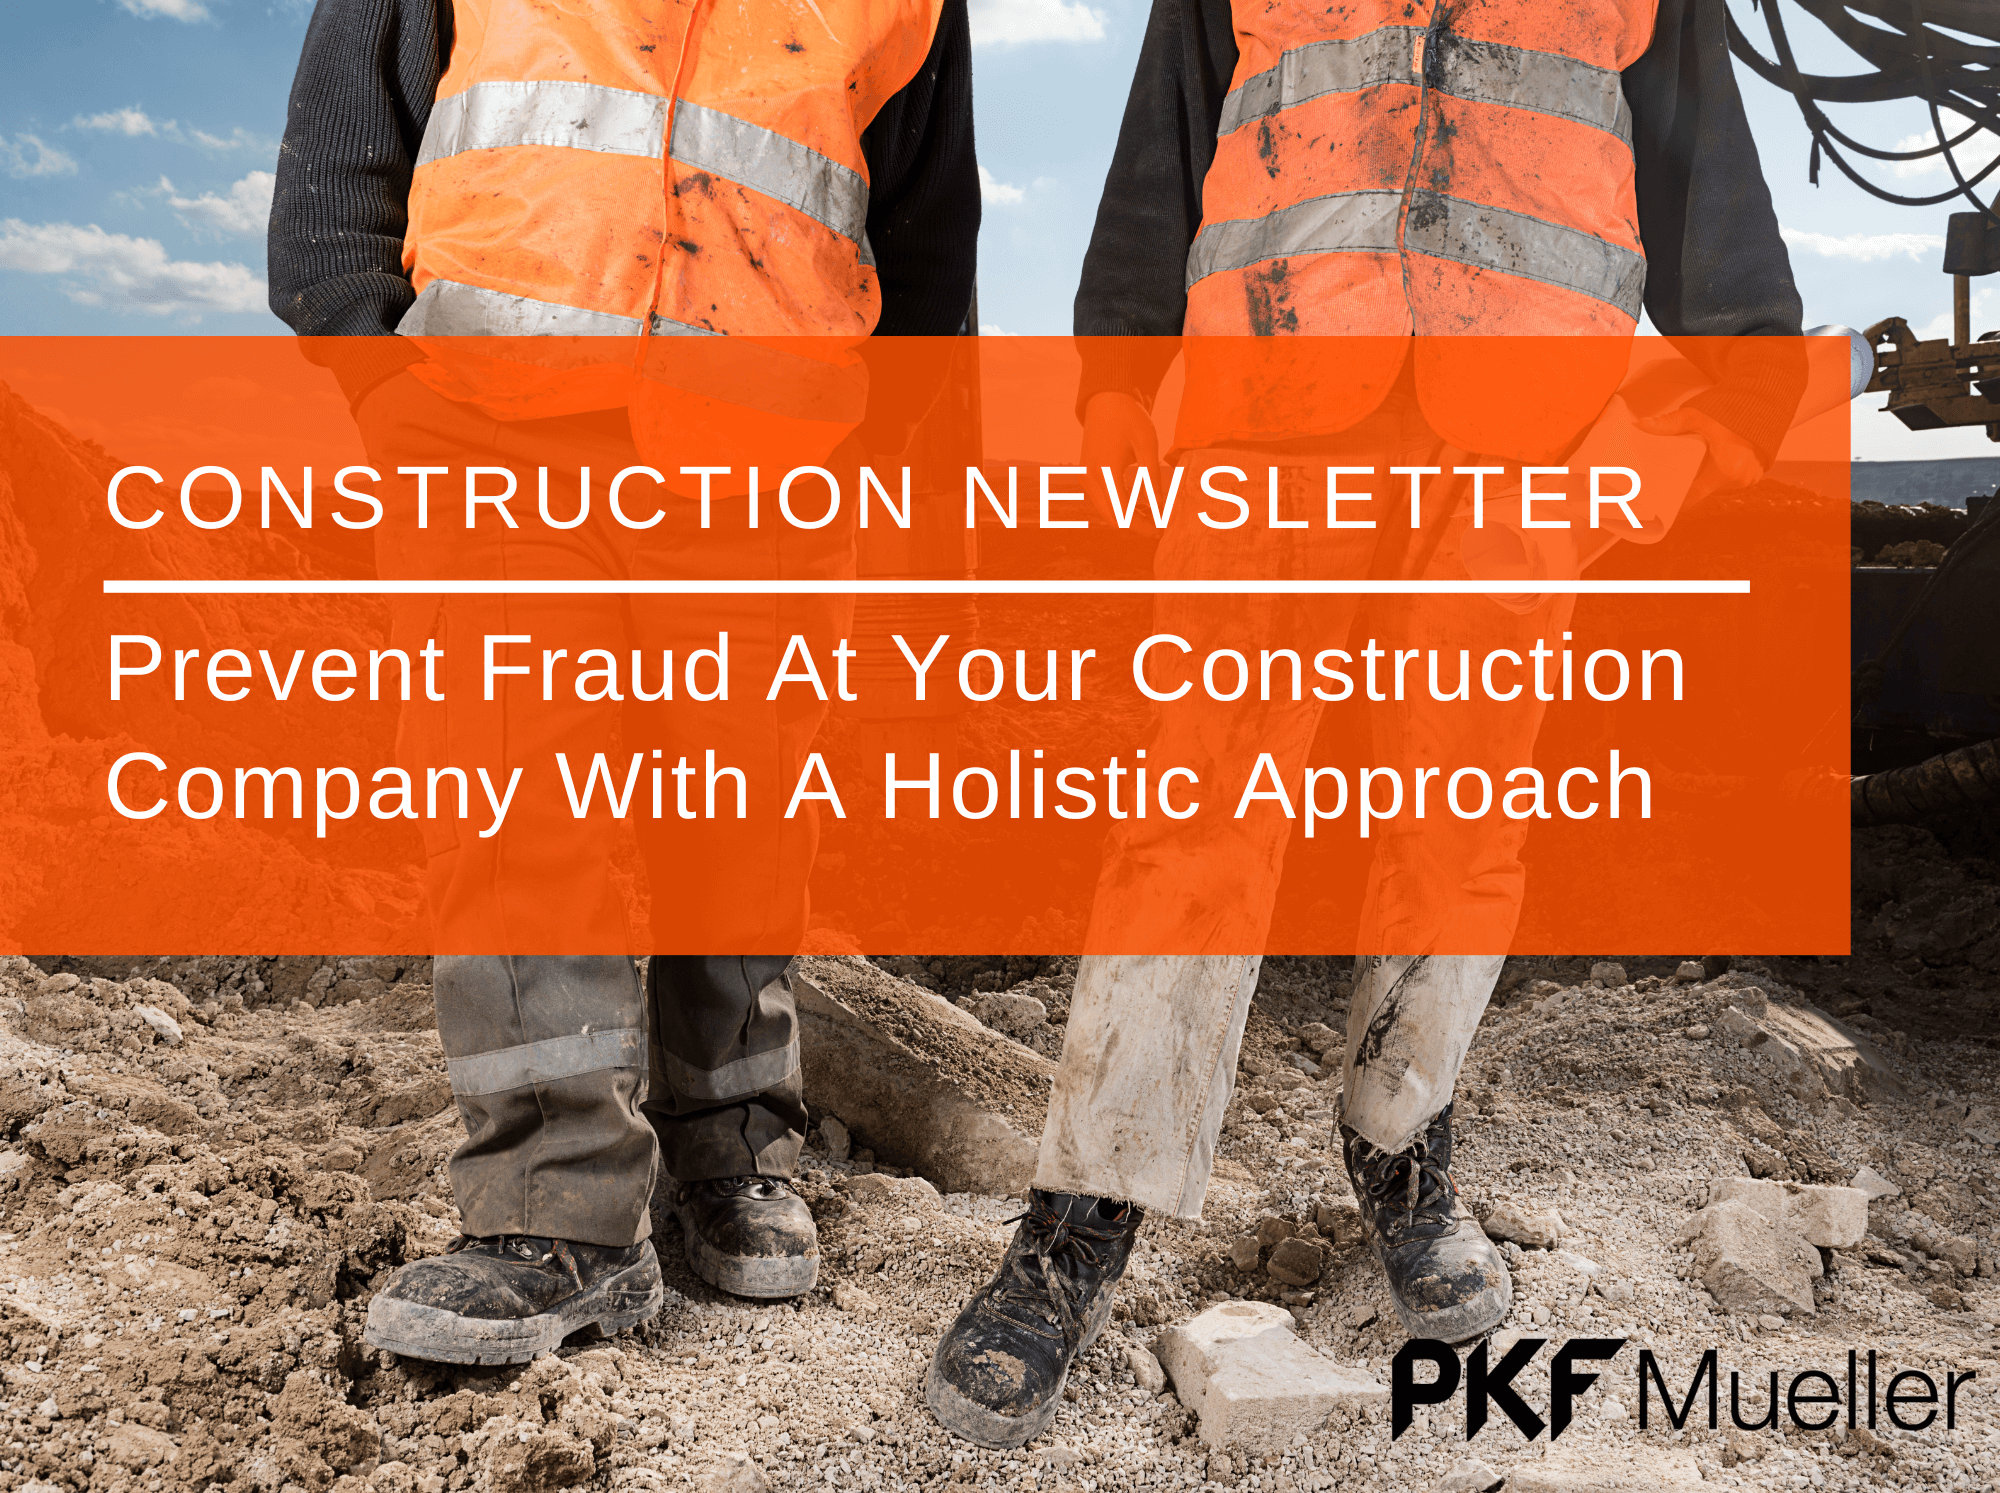 Prevent Fraud At Your Construction Company with a Holistic Approach